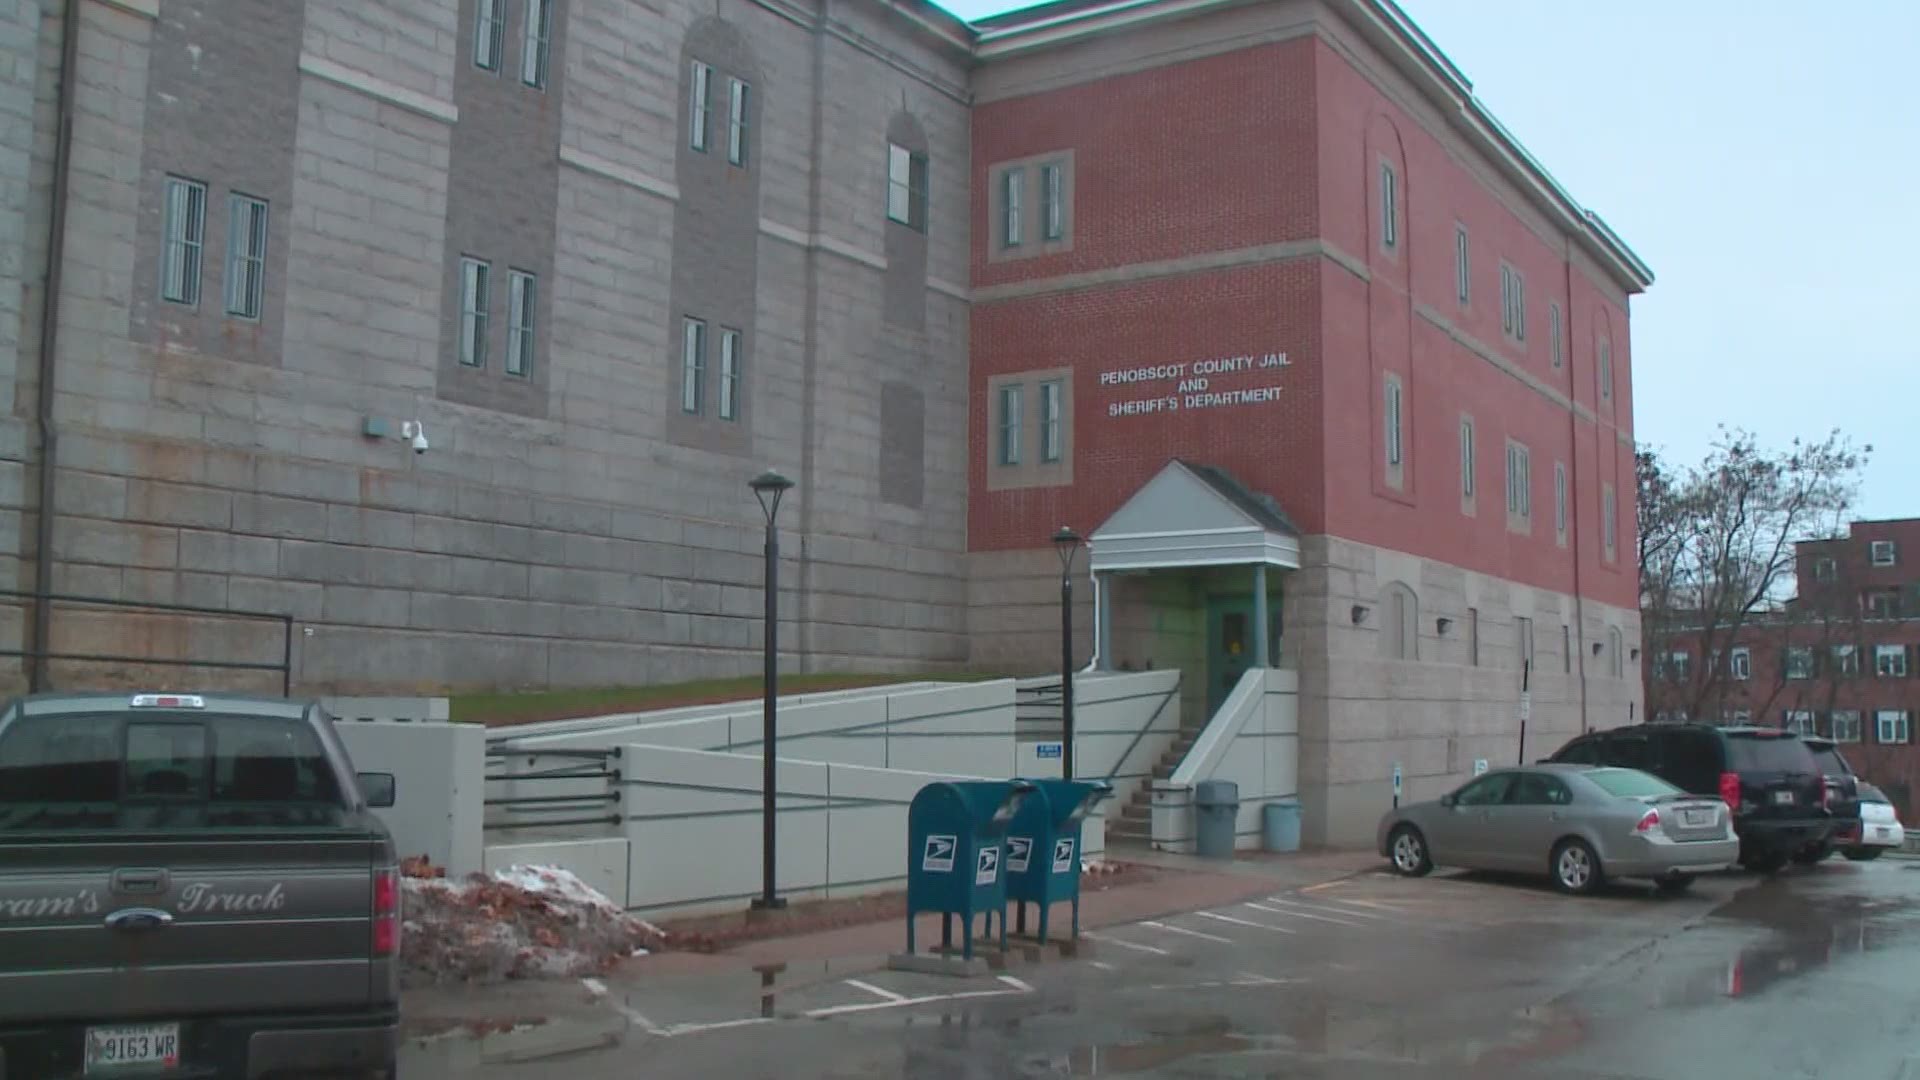 2 Penobscot County Jail inmates test positive for COVID19